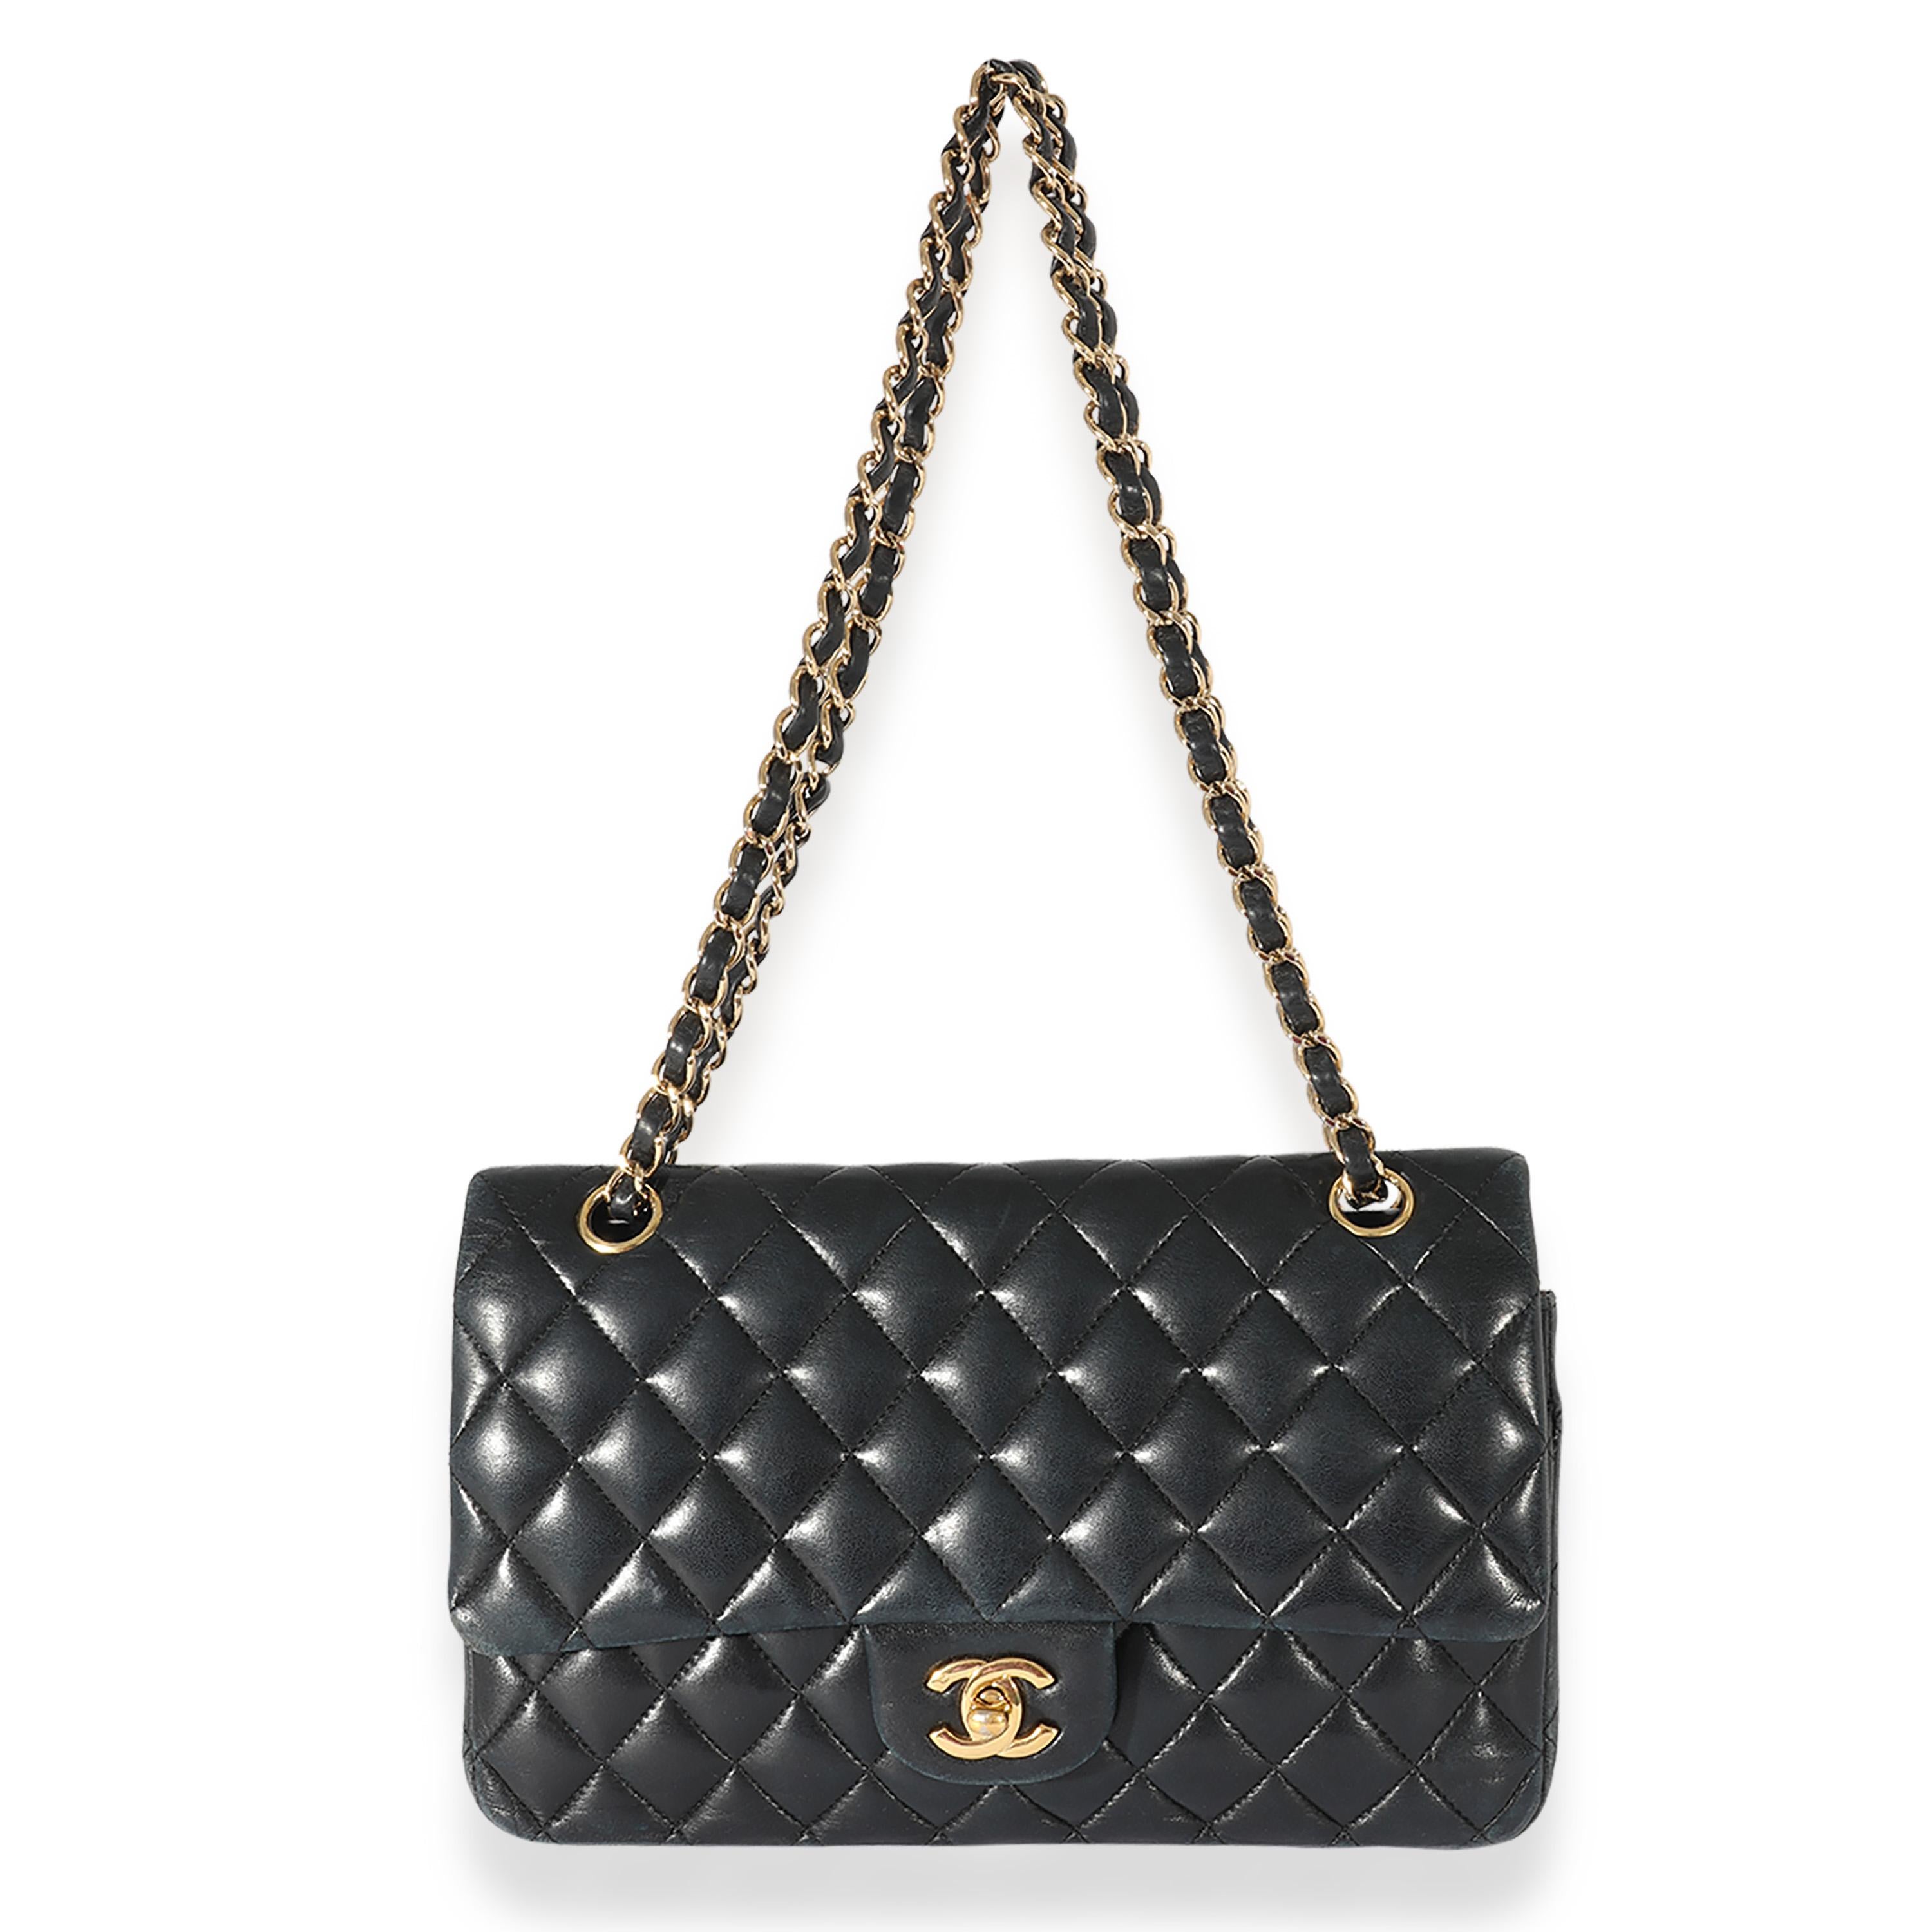 Listing Title: Black Chanel Quilted Lambskin Medium Classic Double Flap Bag
SKU: 125099
Condition: Pre-owned 
Handbag Condition: Fair
Condition Comments: Fair Condition. Heavy scuffing to corners and throughout exterior. Discoloration to lambskin.